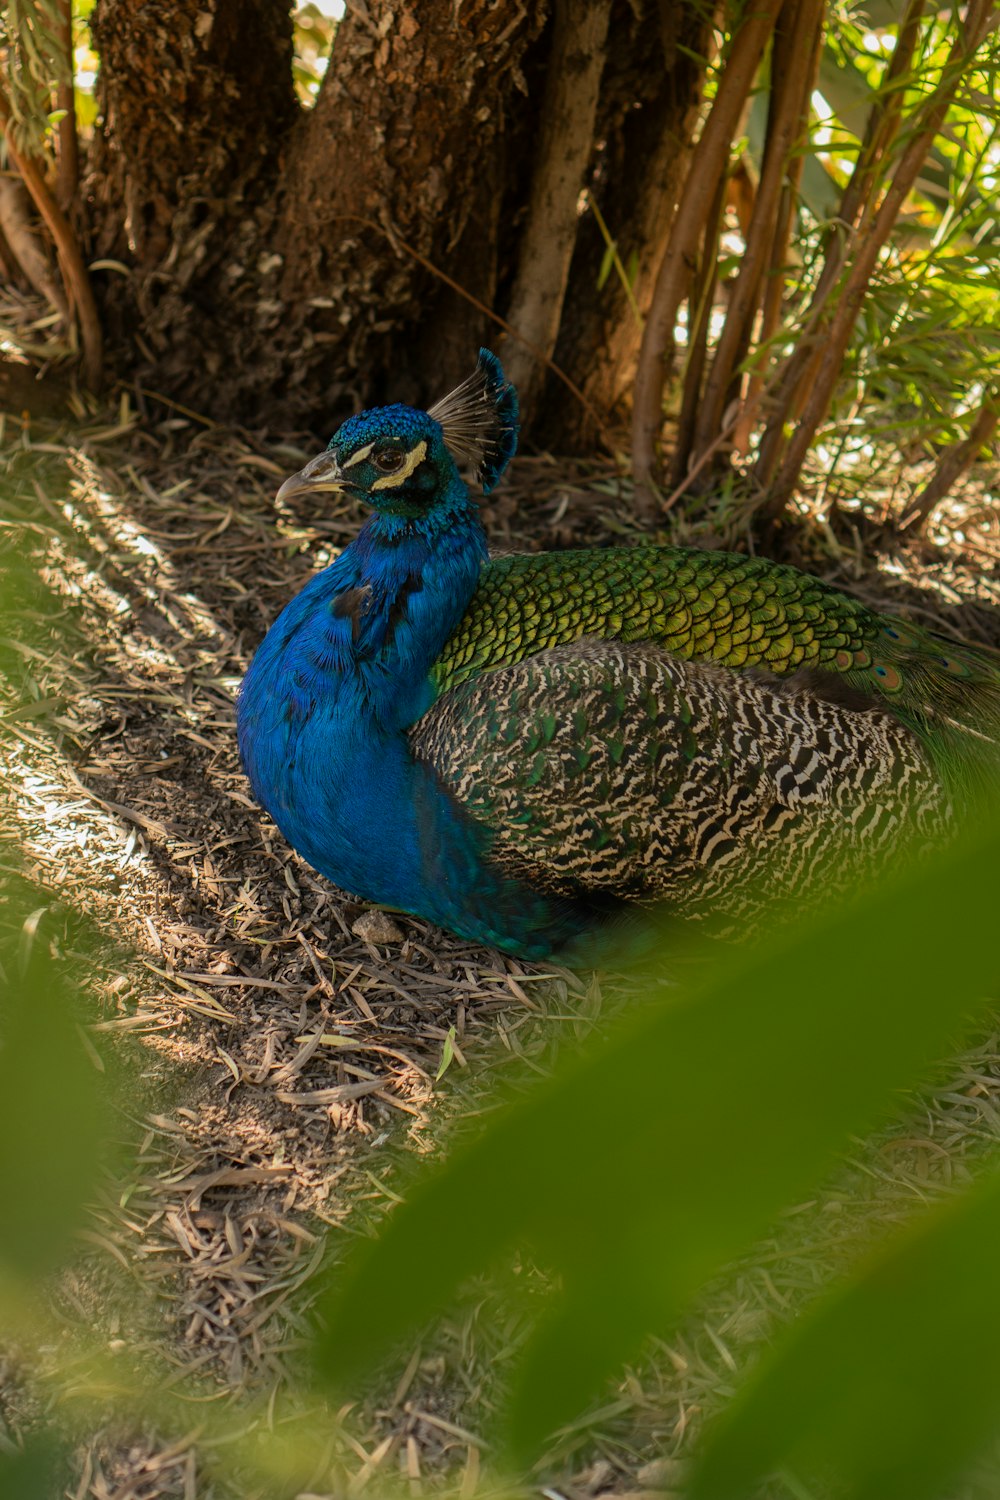 a blue and green bird sitting on the ground next to a tree